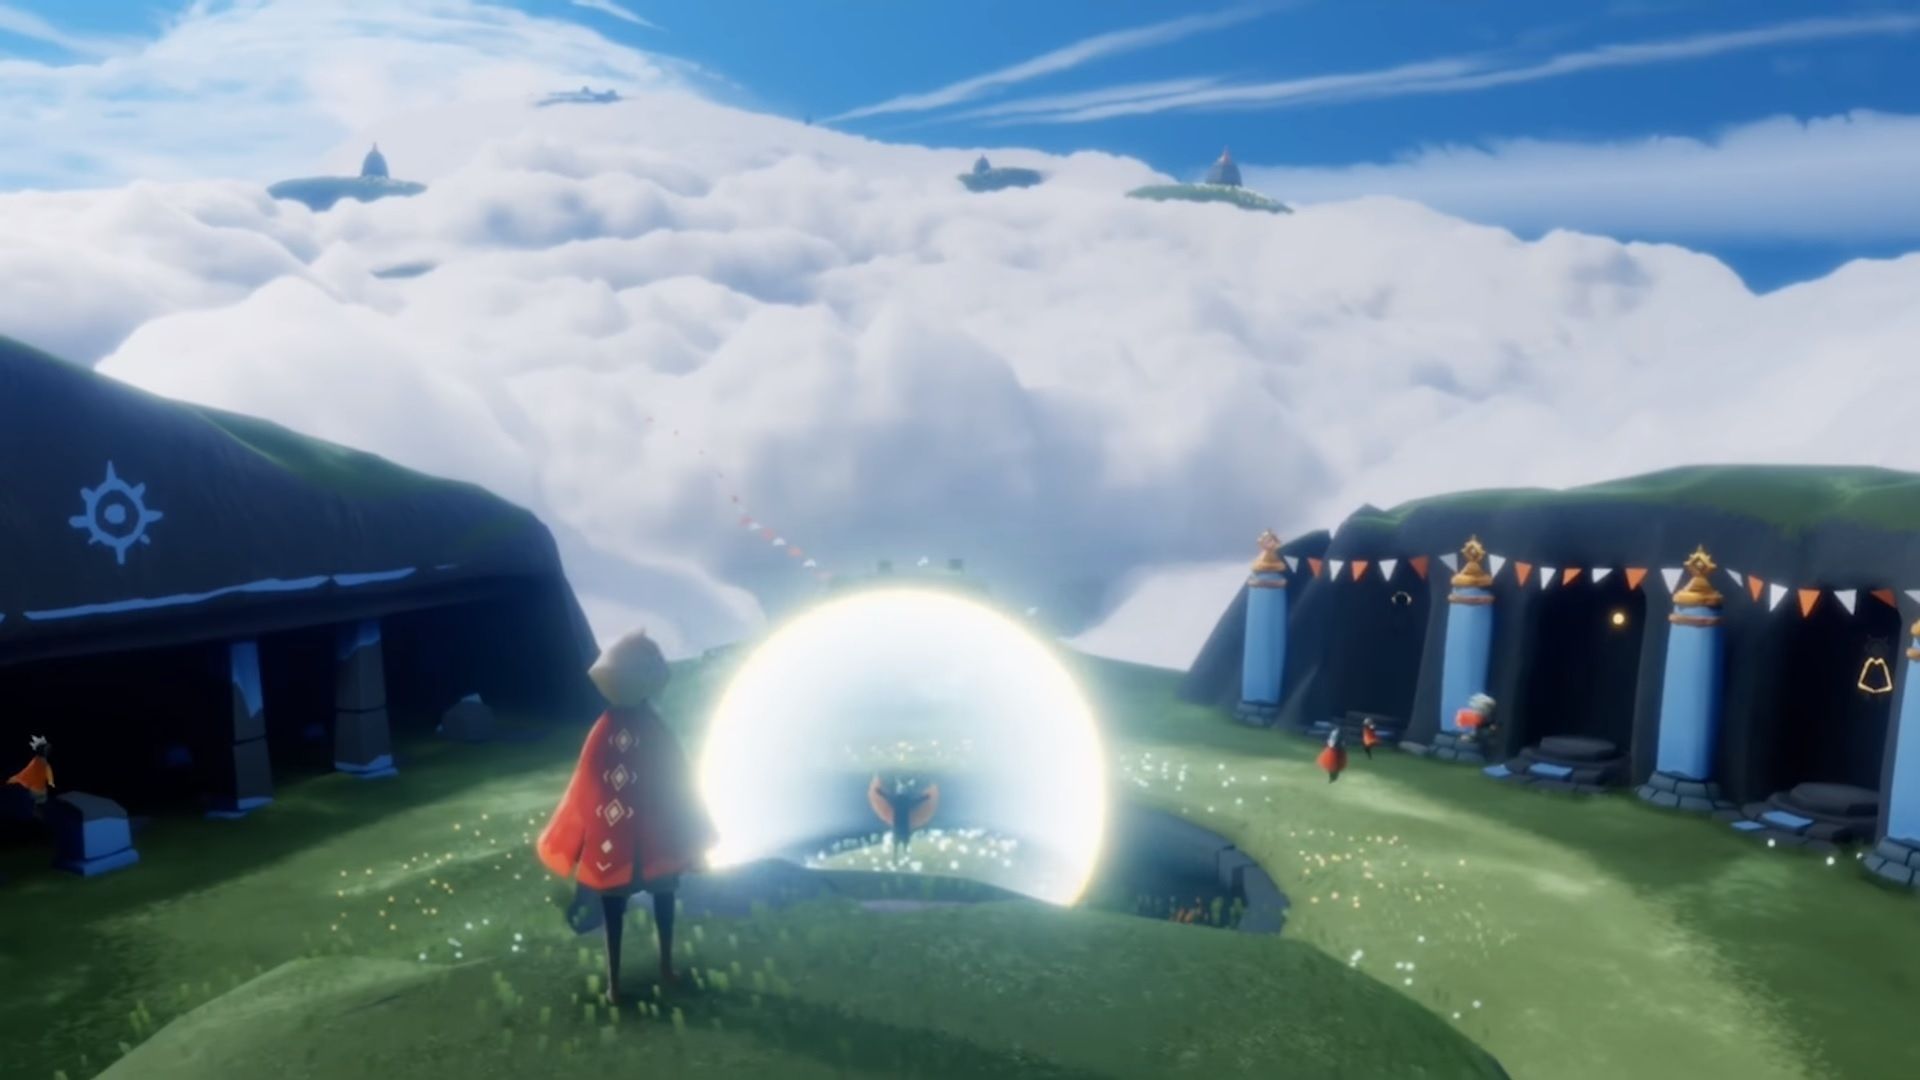 The character from Sky Children of the Light, looking at a large glowing orb, with fluffy clouds in the distance.